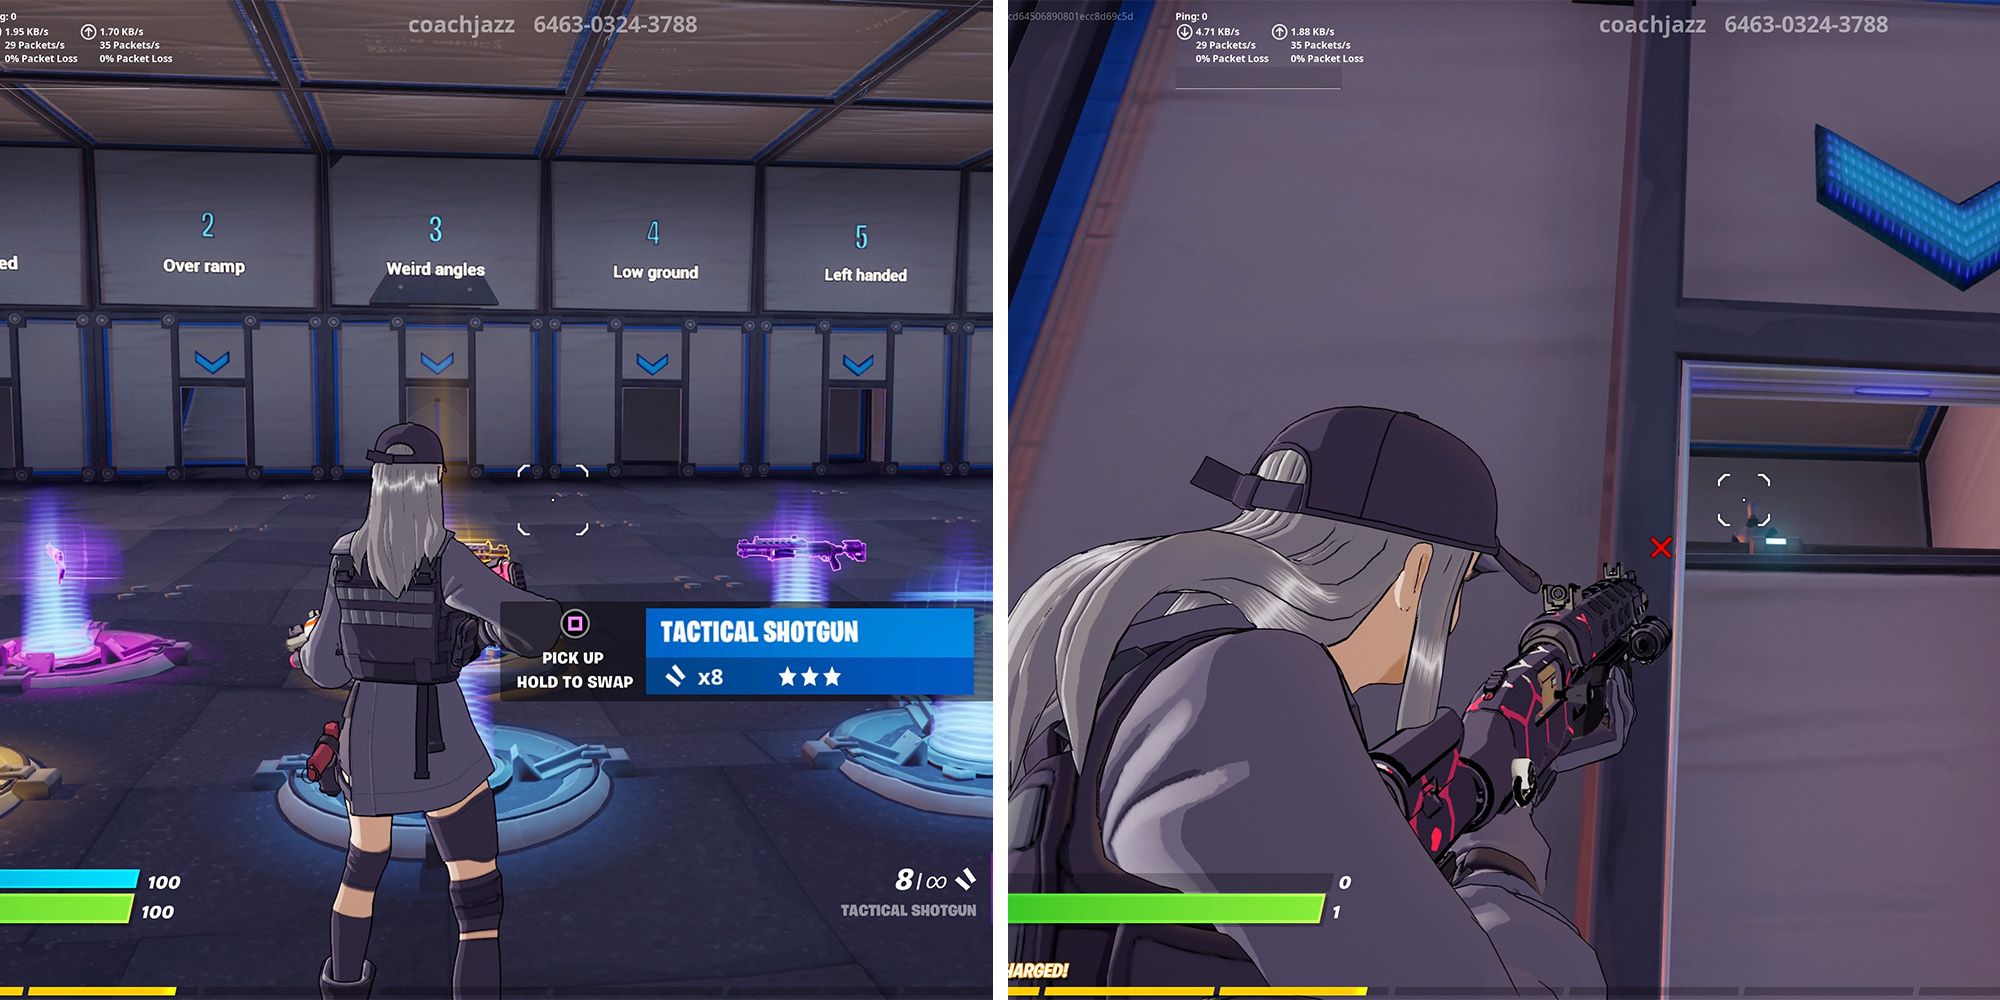 Peek and movement training course in Fortnite creative mode